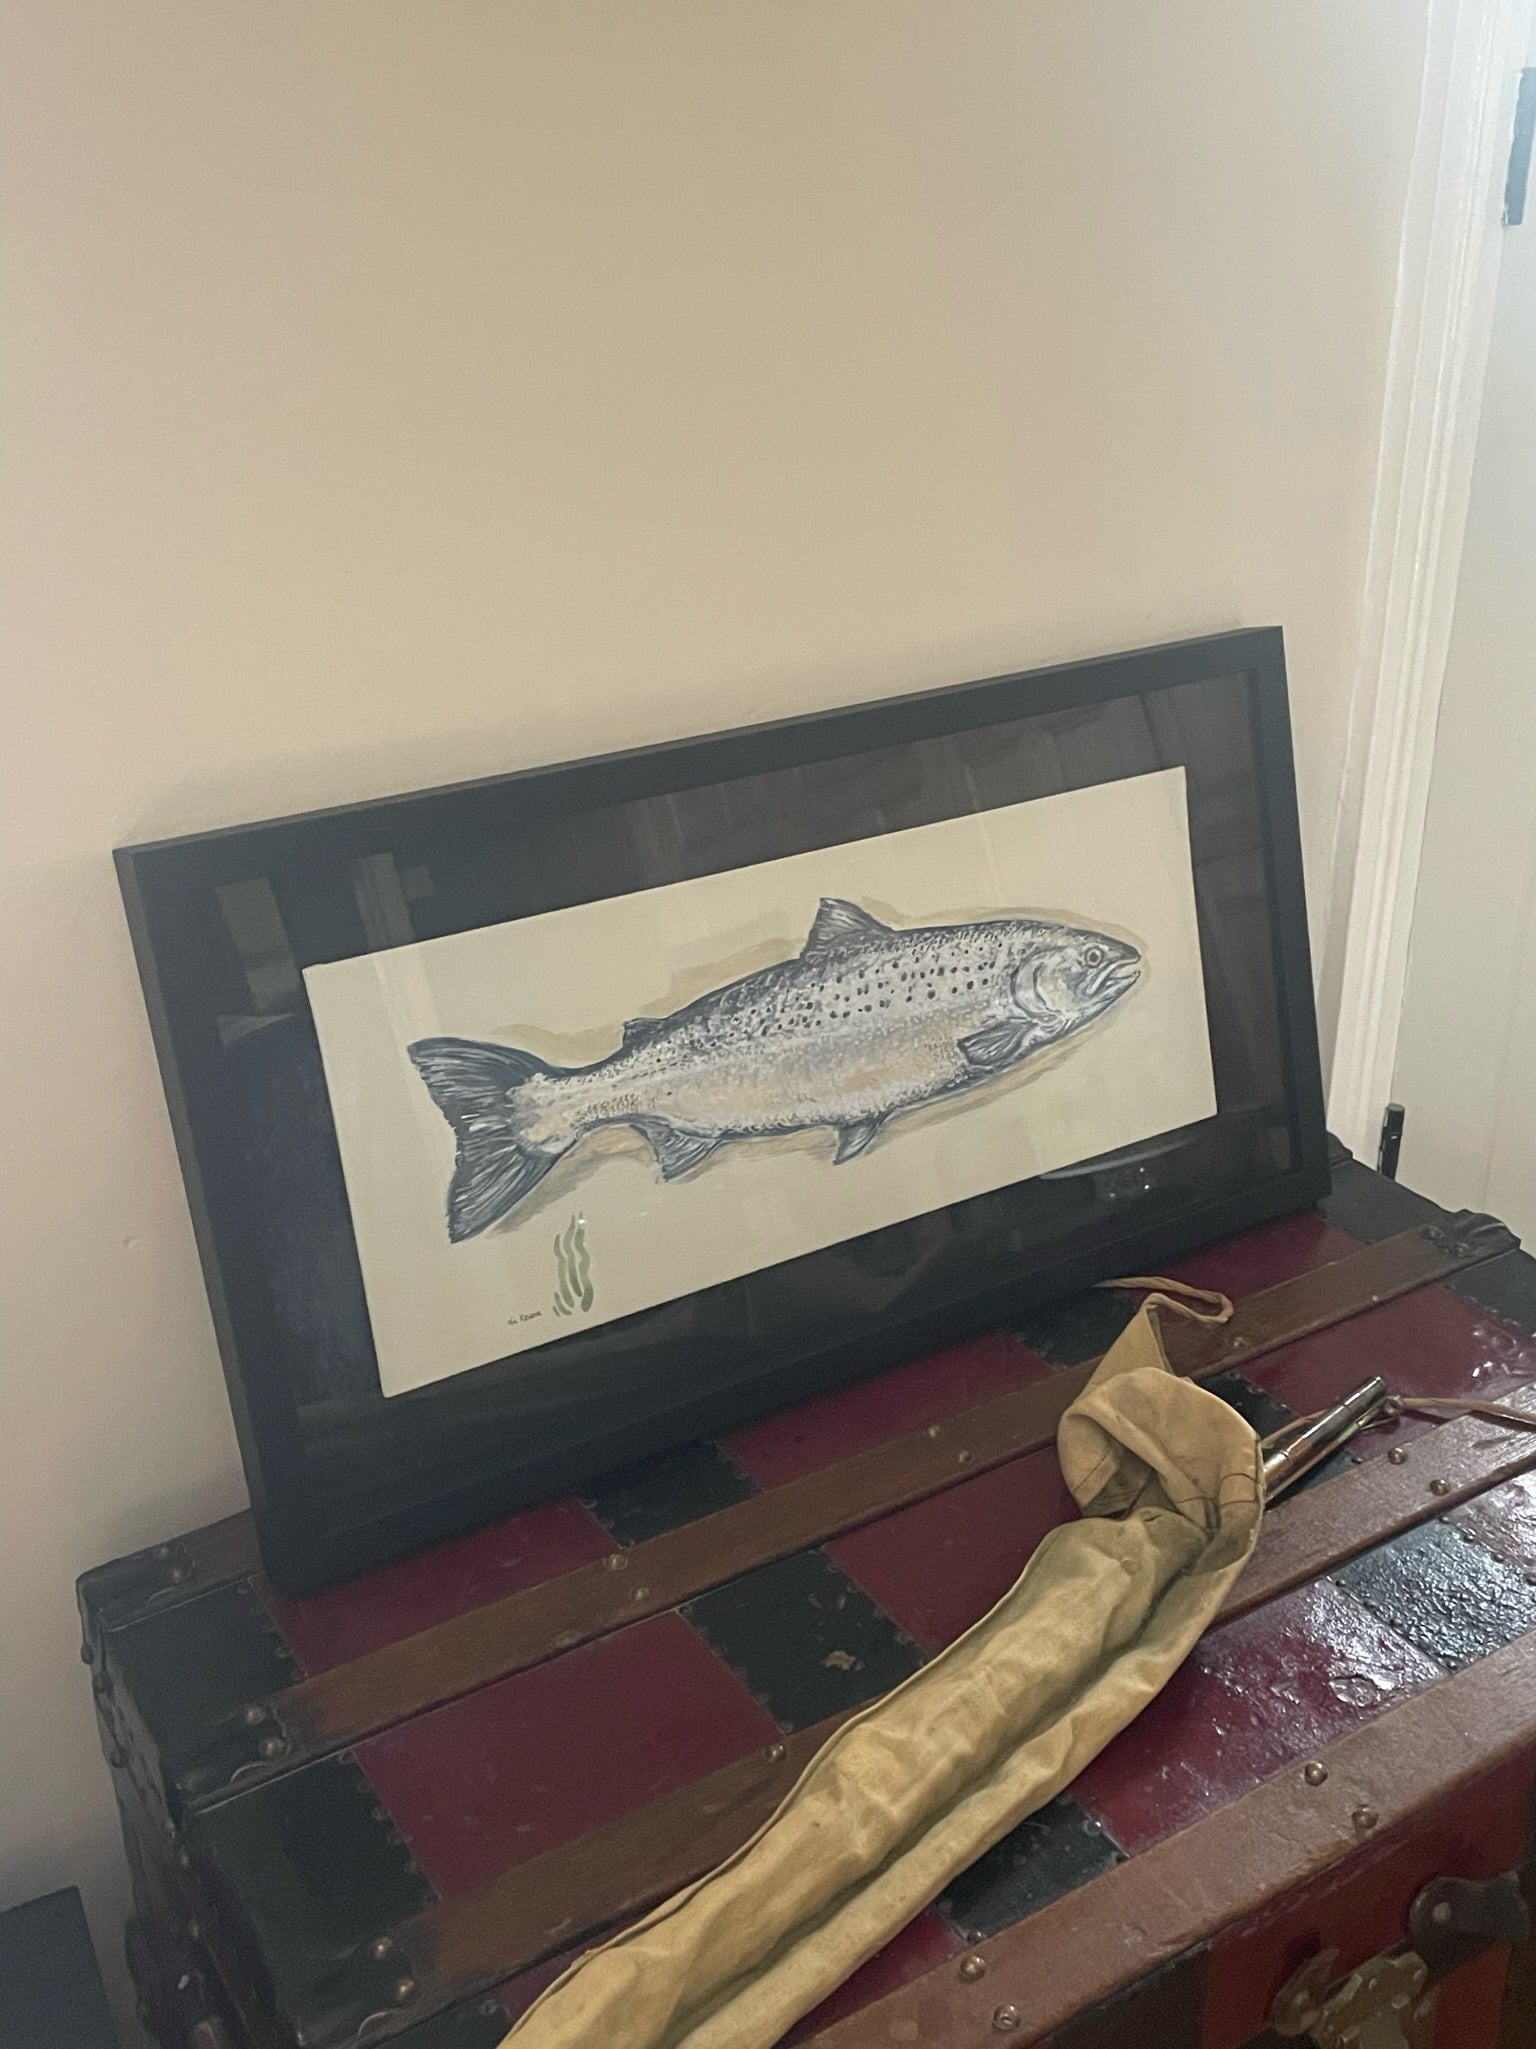 Salmon.  This painting is reminiscent of the traditional taxidermy fish displayed in a glass fronted case, often seen in country houses and fieldsports lodges.